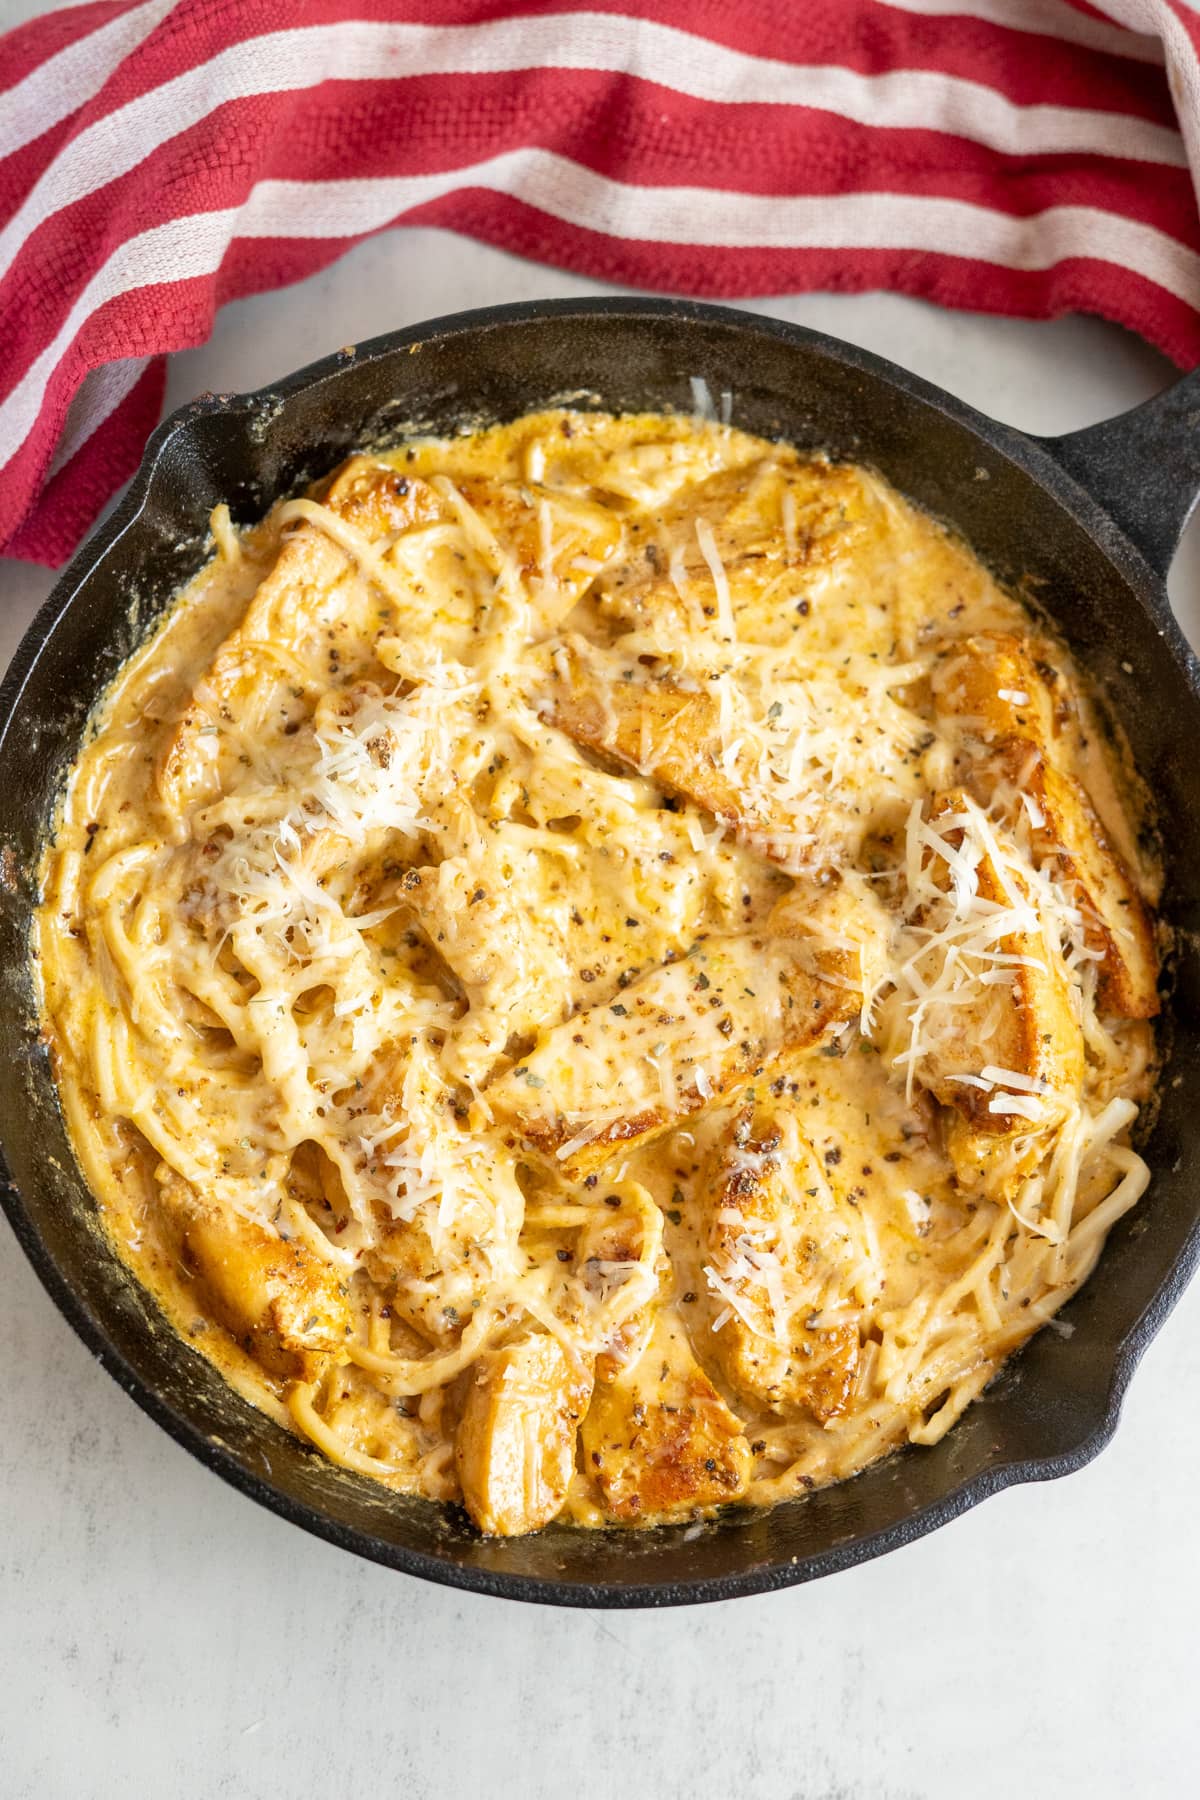 Cheesy chicken pasta in a skillet on a red and white striped tablecloth.